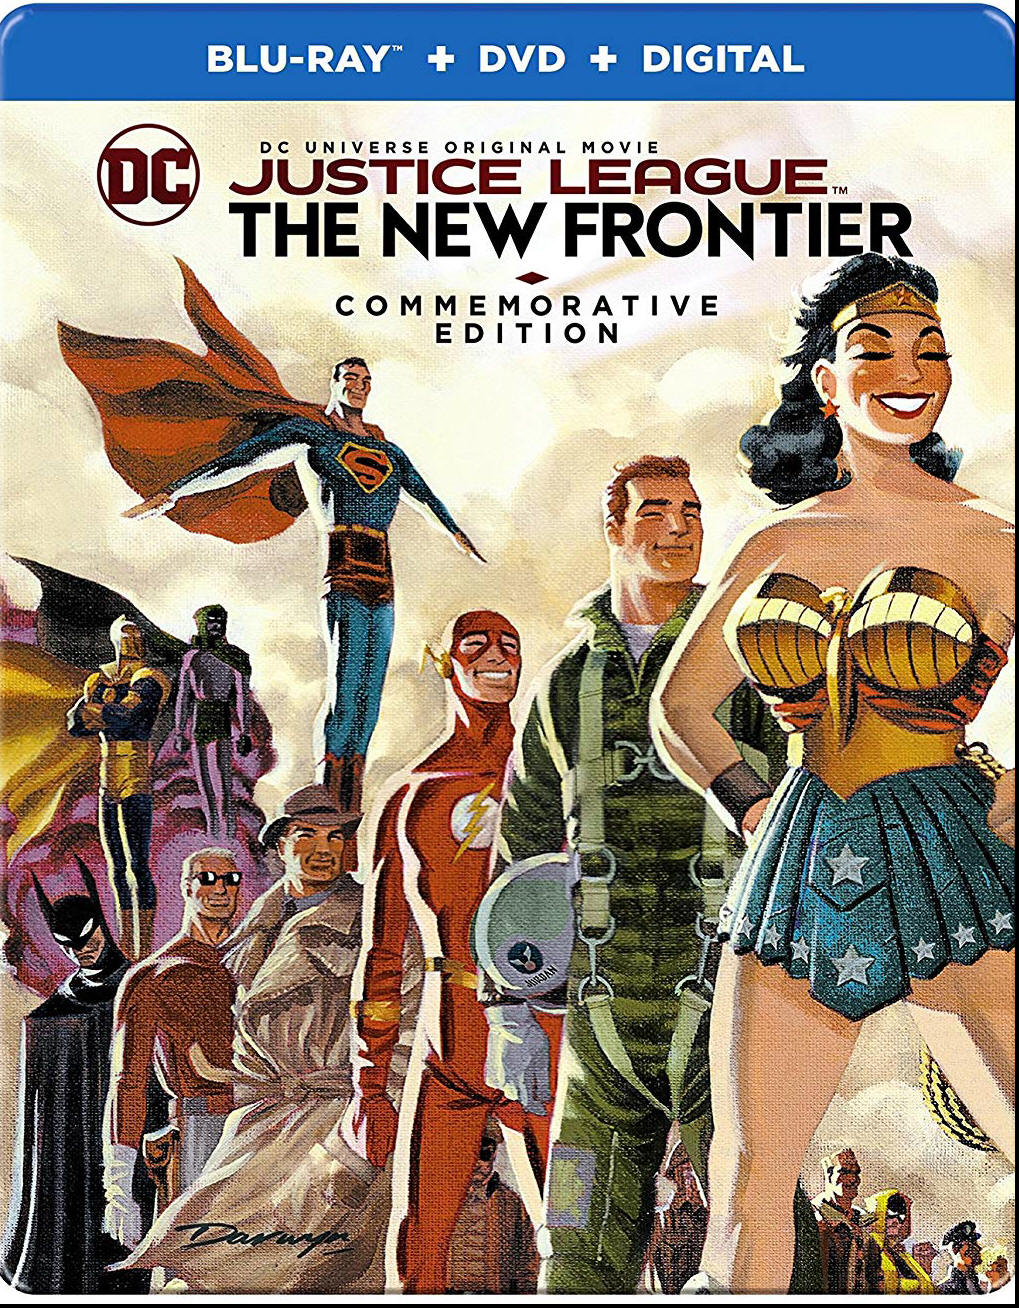 Justice League - New Frontier - Blu-Ray DVD